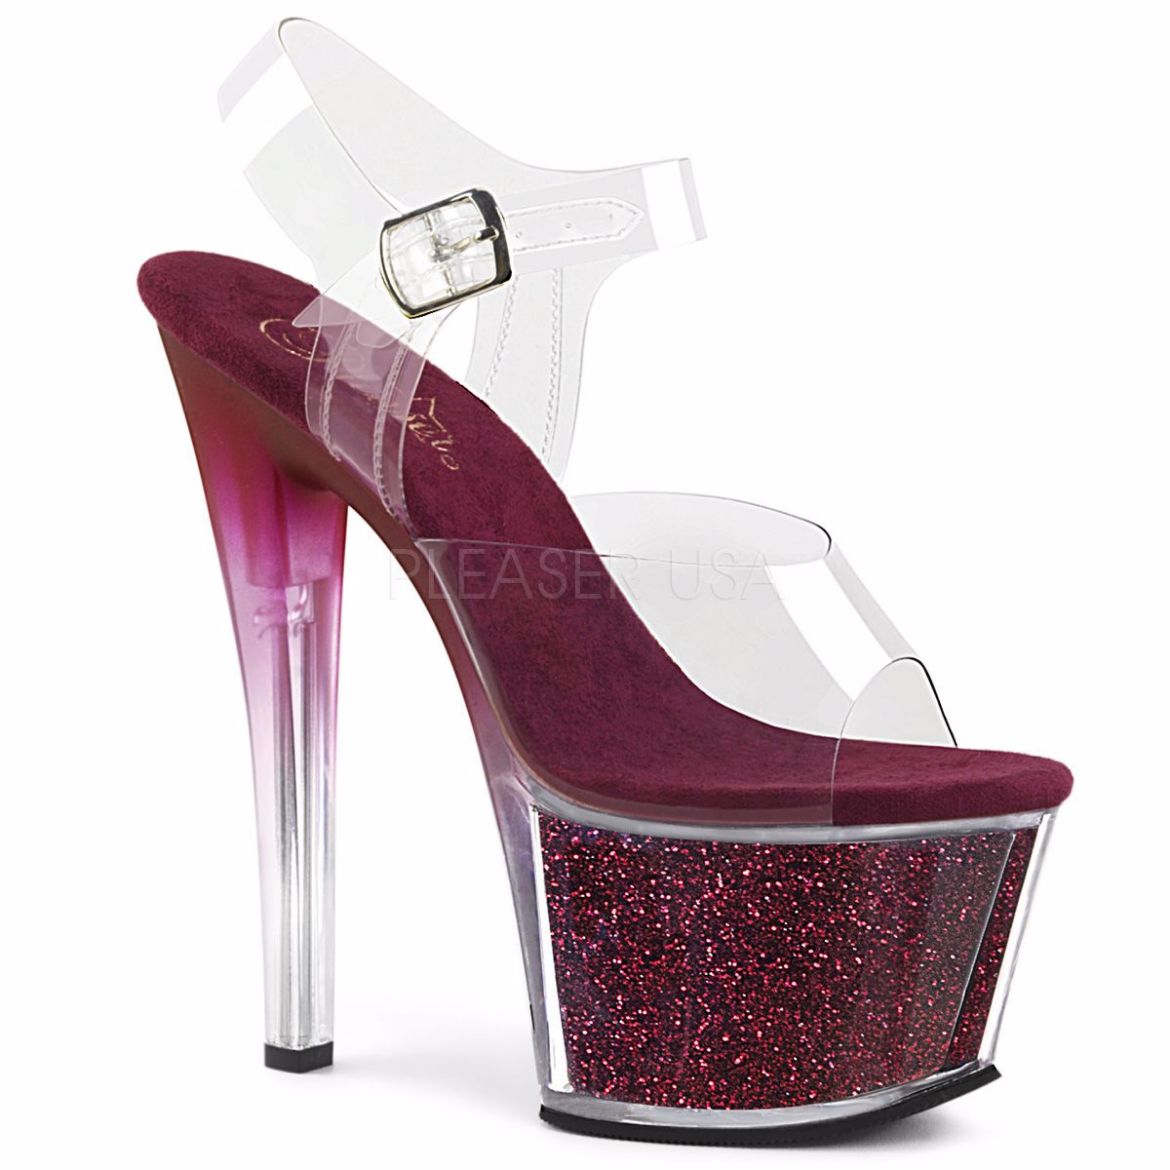 Product image of Pleaser Sky-308G-T Clear/Berry Glitter Inserts, 7 inch (17.8 cm) Heel, 2 3/4 inch (7 cm) Platform Sandal Shoes